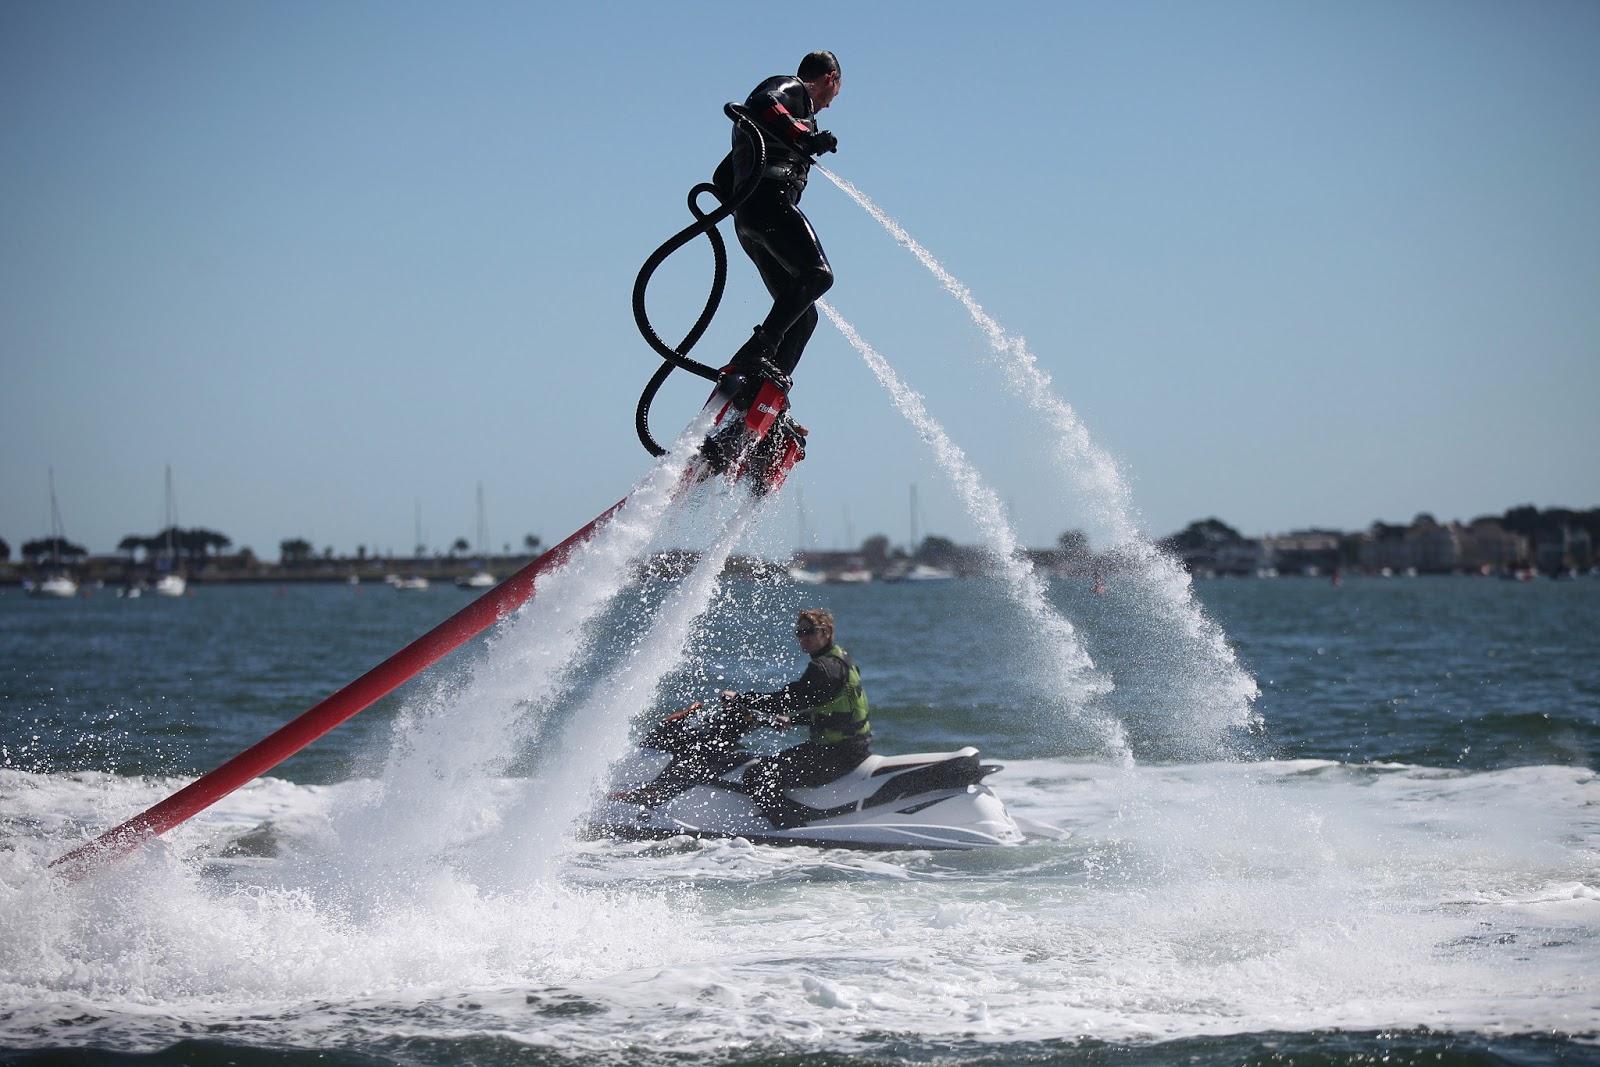 Jake Moore Photography - Weddings and Water Sports: Extreme Water Jet.